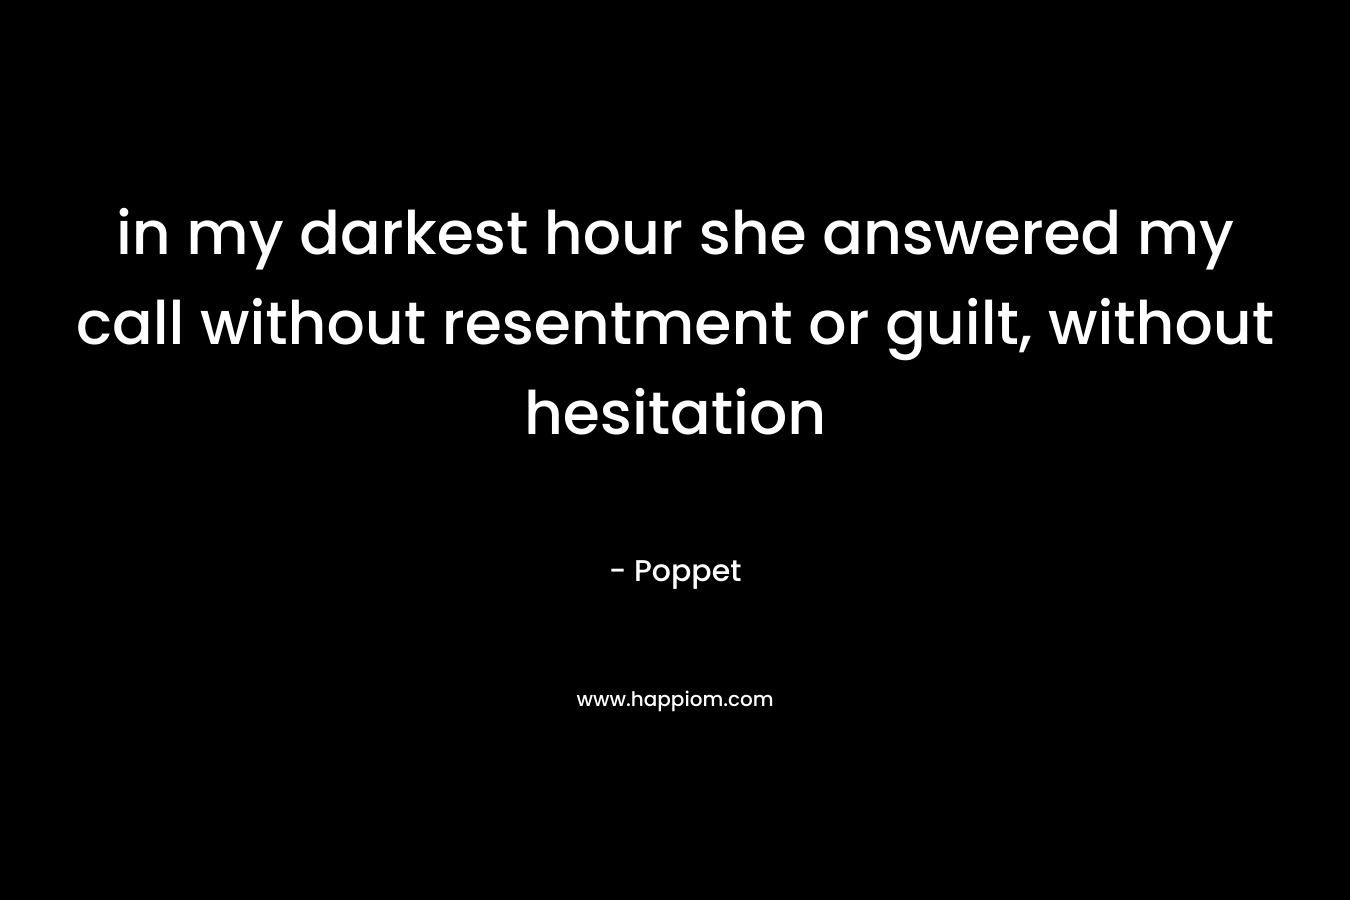 in my darkest hour she answered my call without resentment or guilt, without hesitation